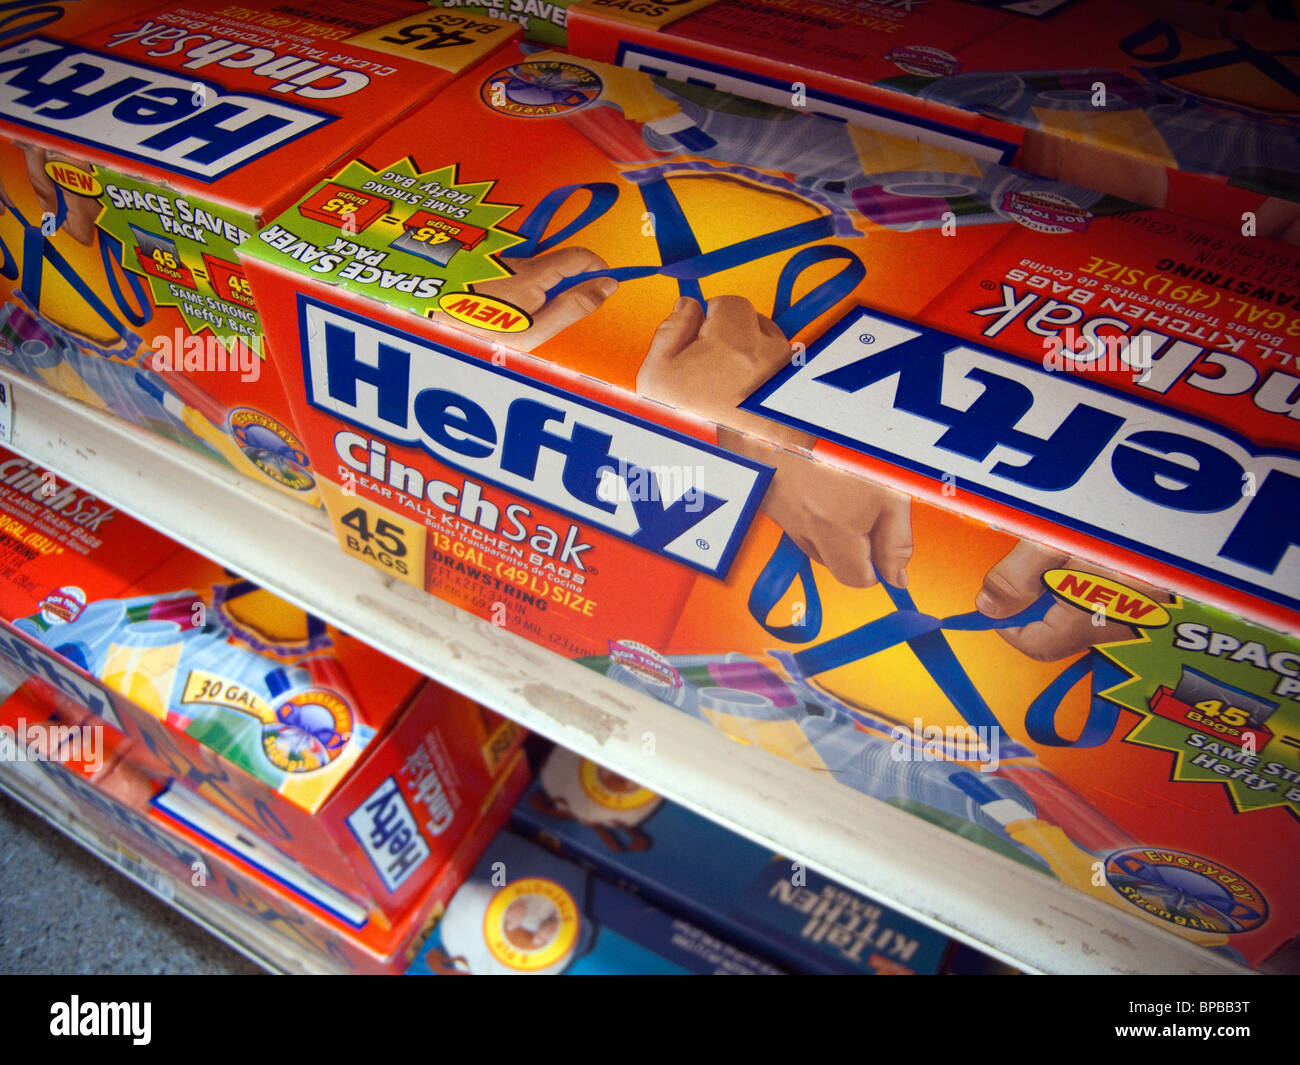 Boxes of Hefty trash bags are seen on a supermarket shelf in New York Stock Photo